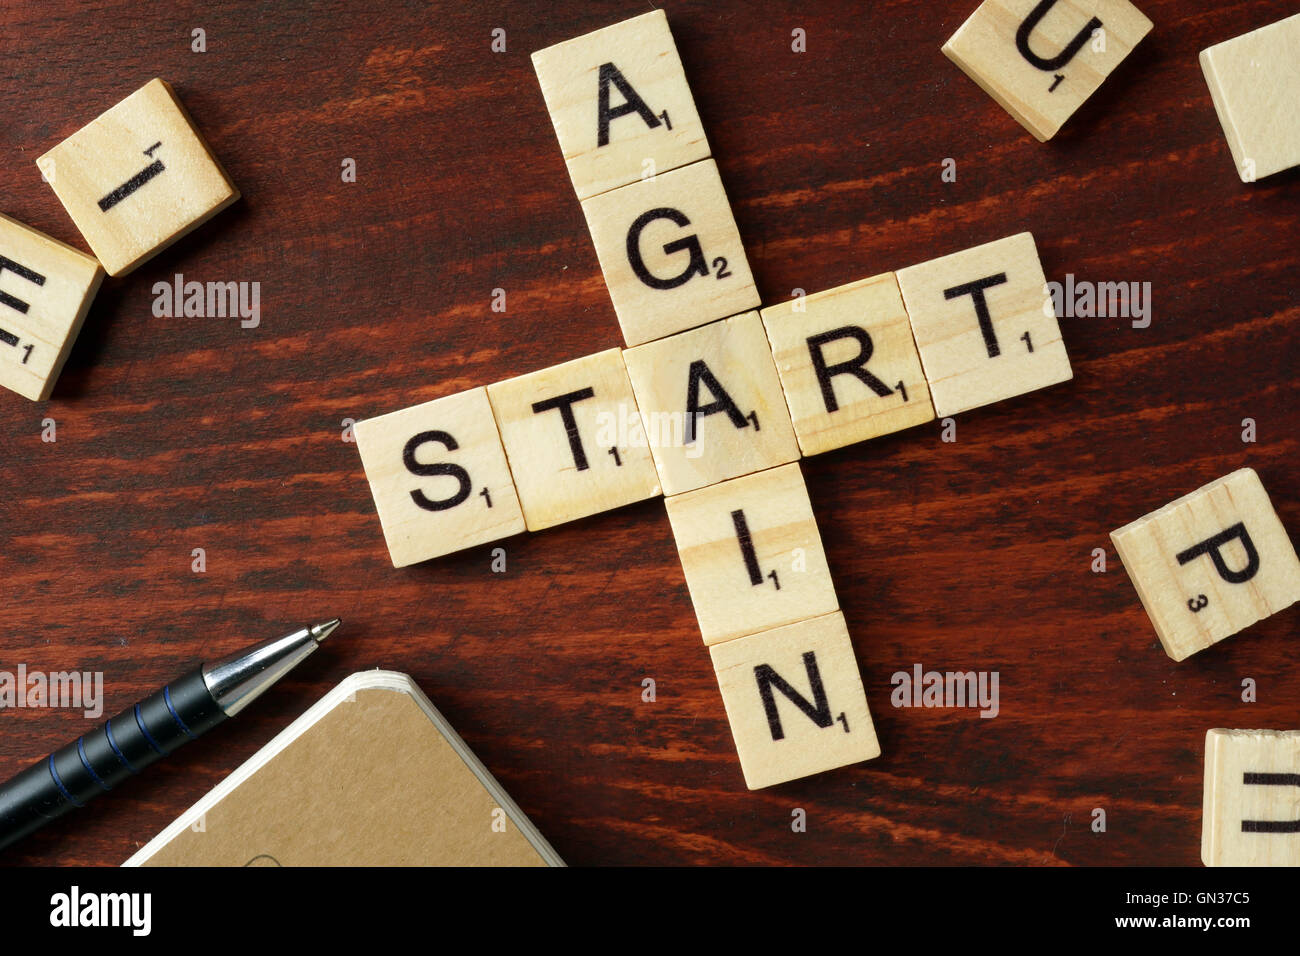 Words Start Again from wooden blocks with letters. Stock Photo